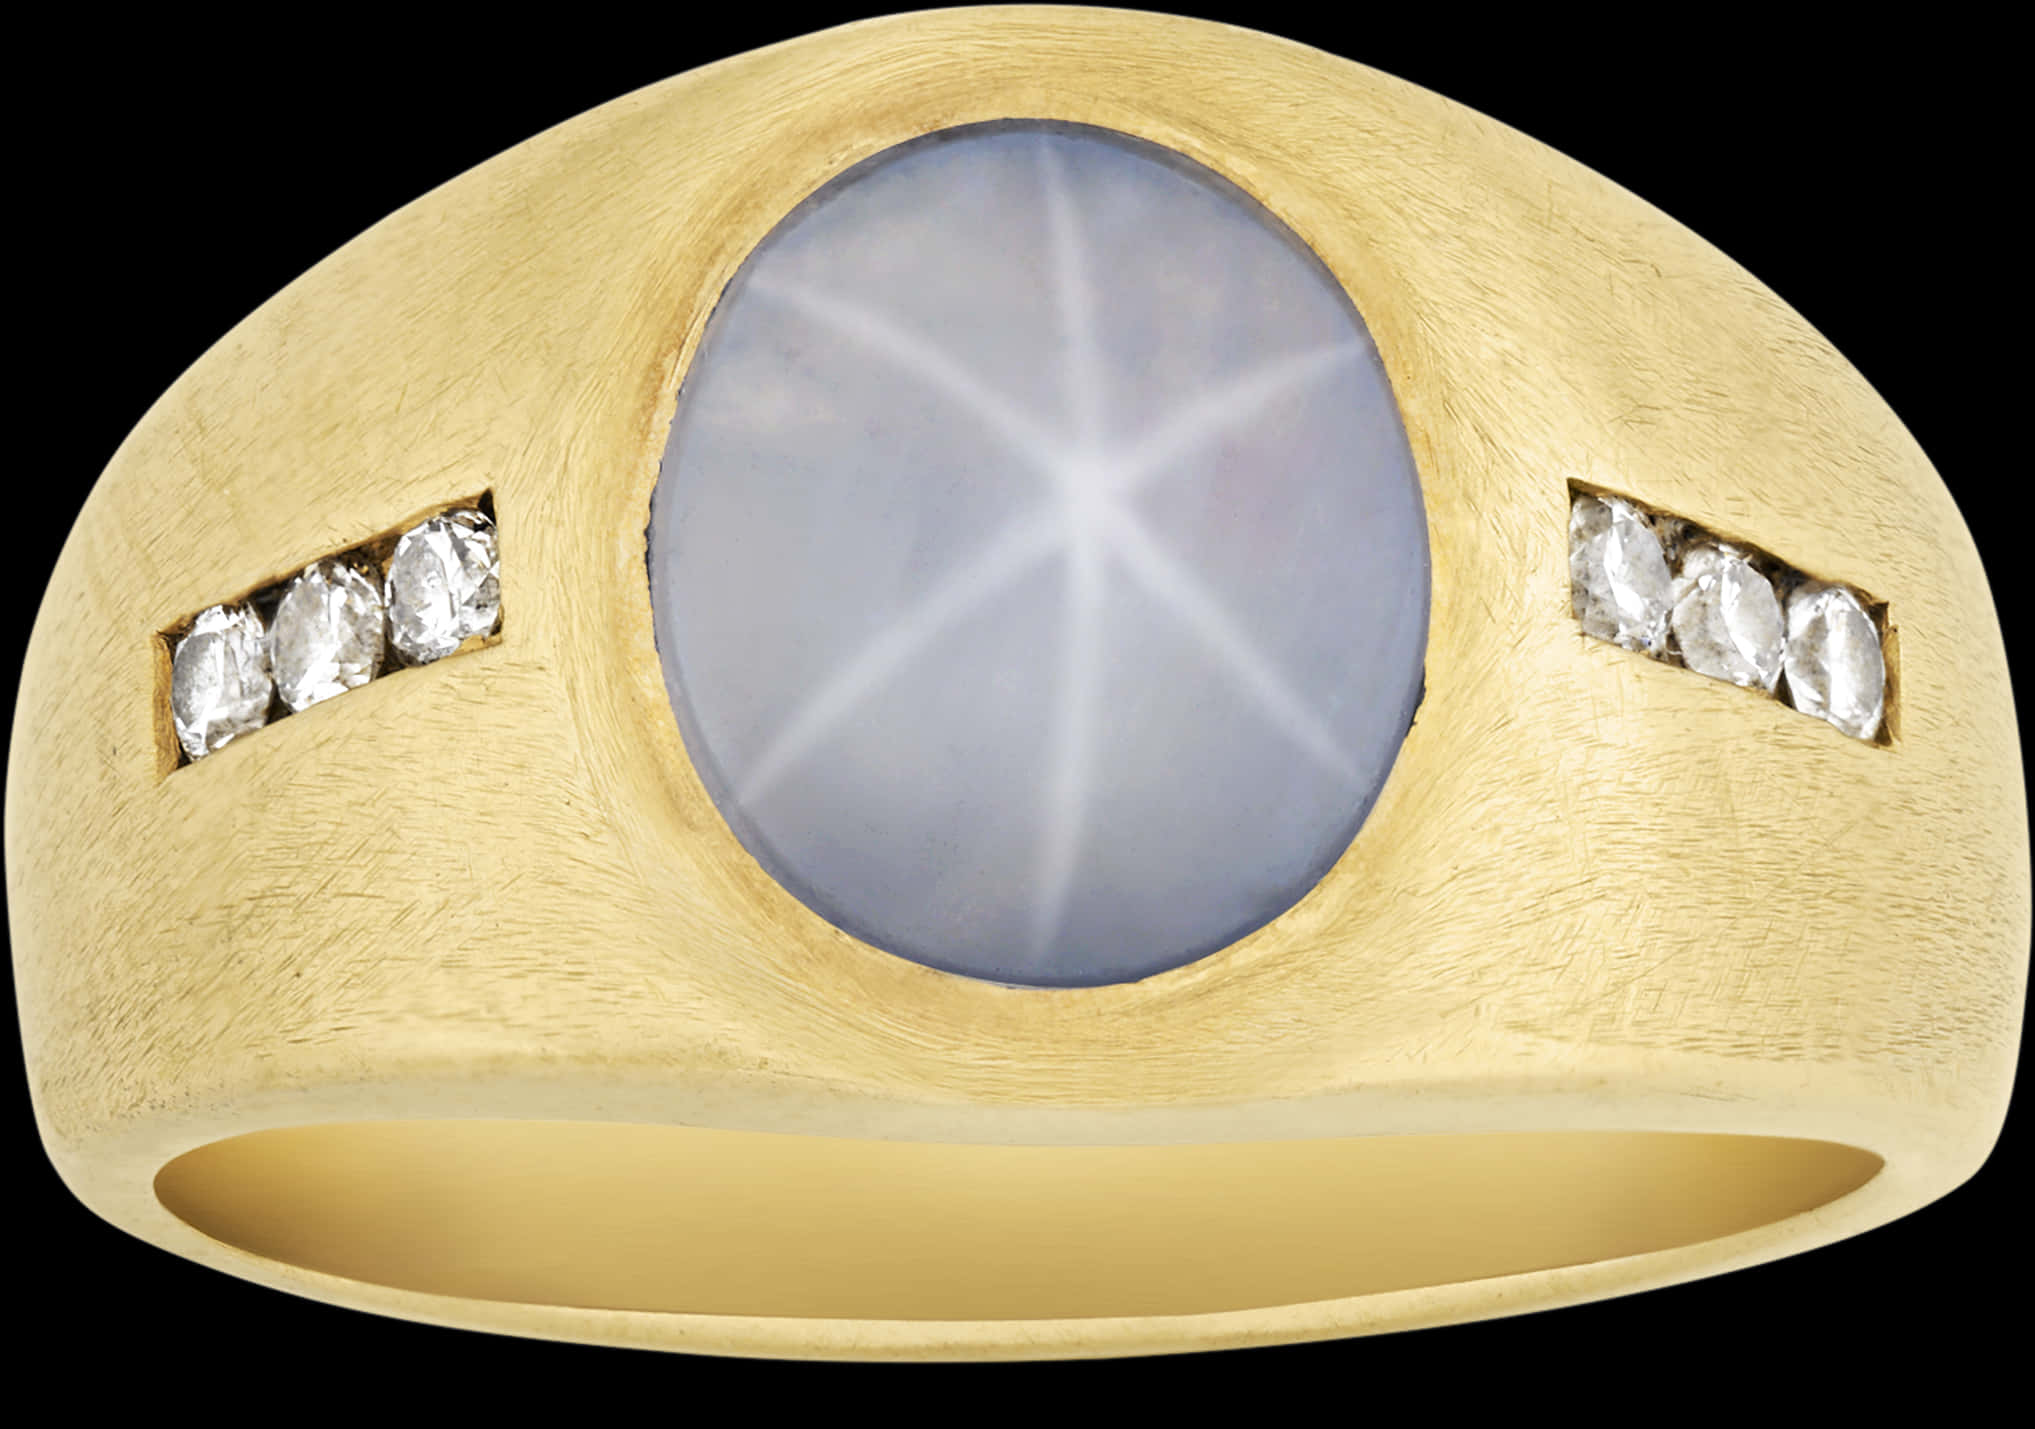 A Gold Ring With A Blue Stone And Diamonds